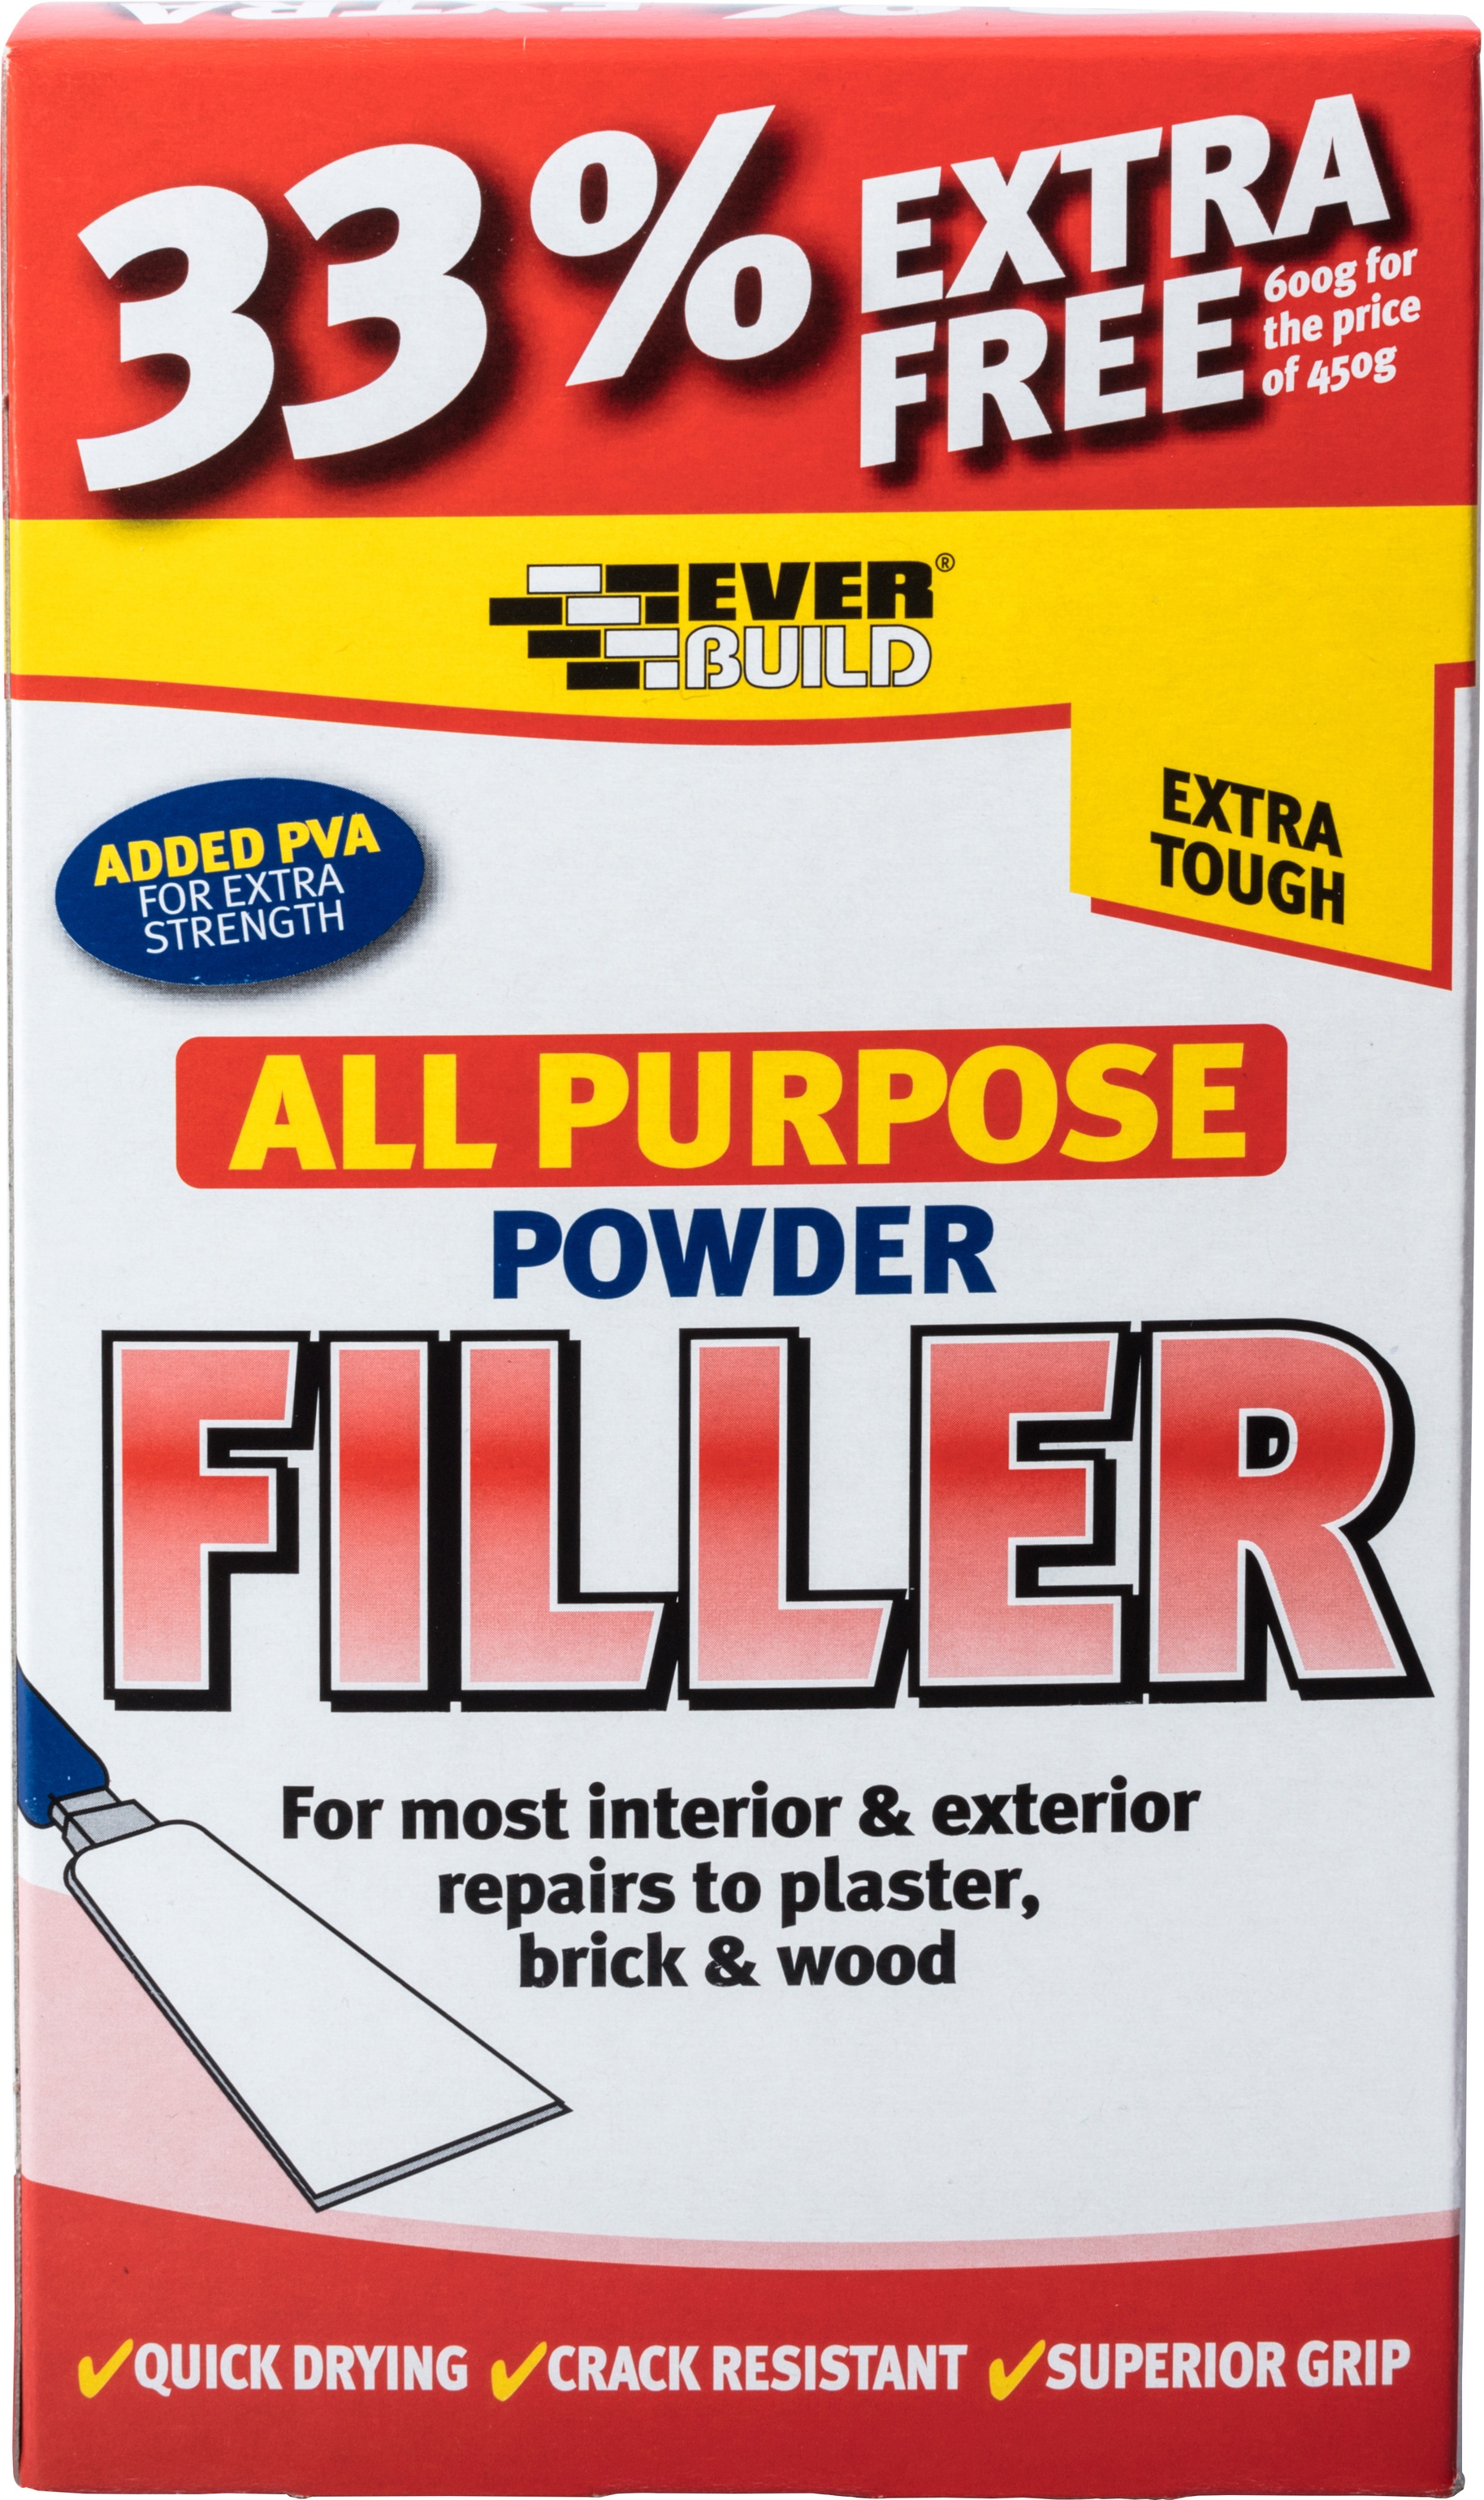 All Purpose Powder Filler With 30% Free 450gm